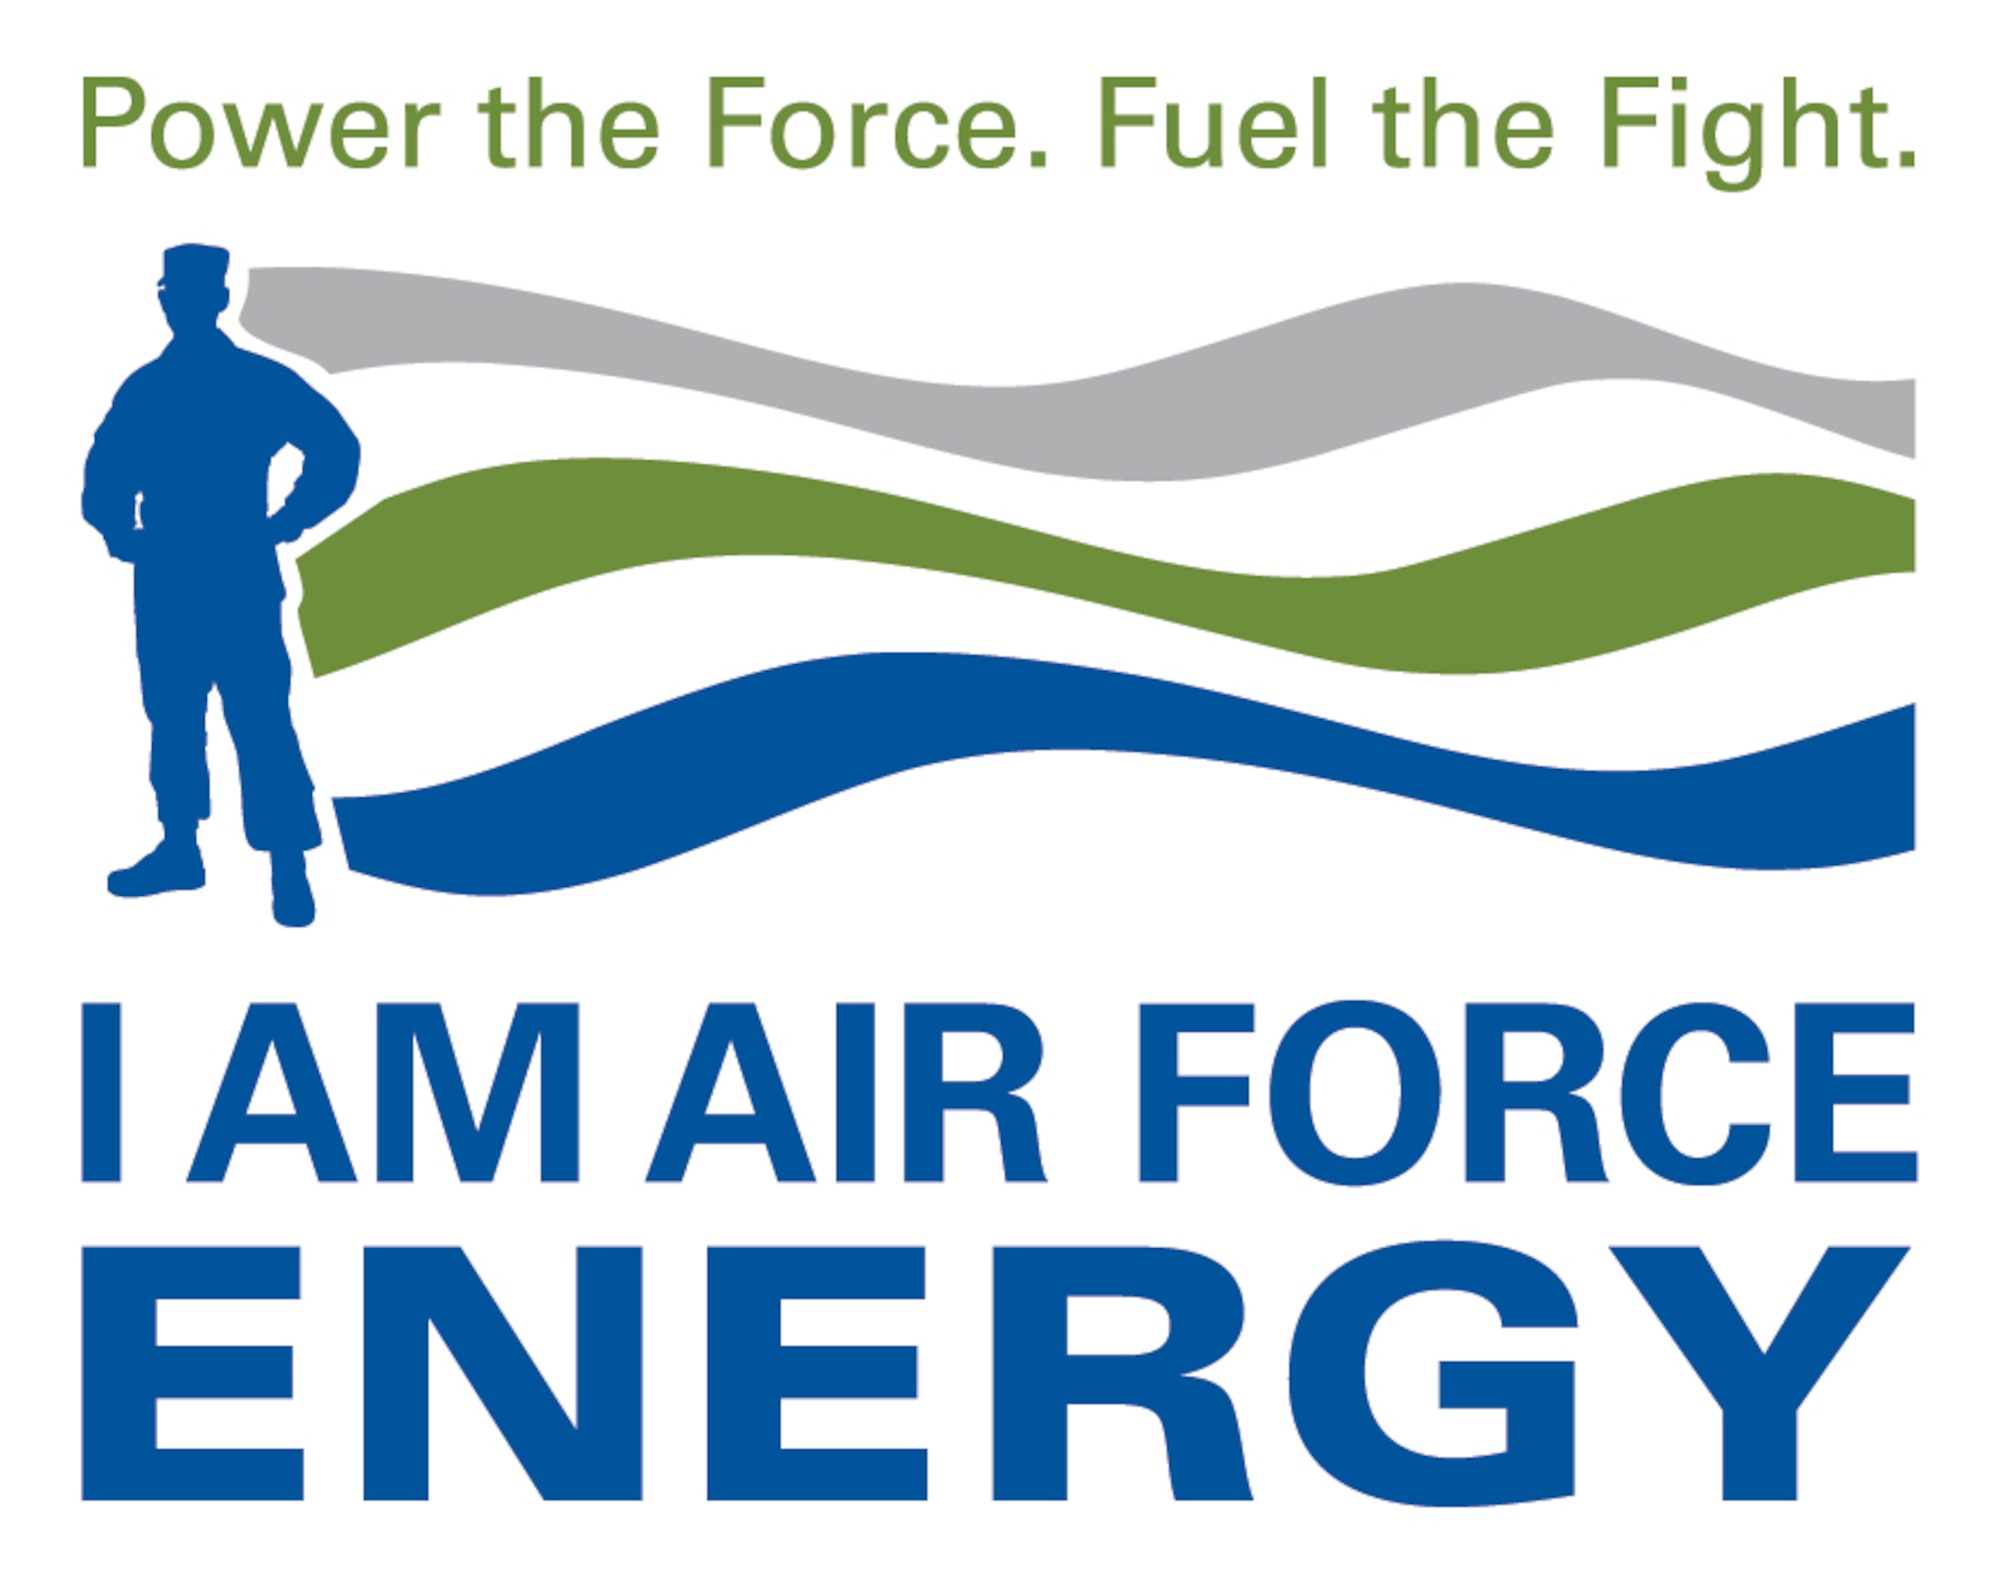 October, Energy Action Month, provides an opportunity to promote energy and water conservation awareness as part of a national campaign led by the Department of Energy. The theme, ‘I am Air Force Energy,’ puts the Airman at the center of the campaign.